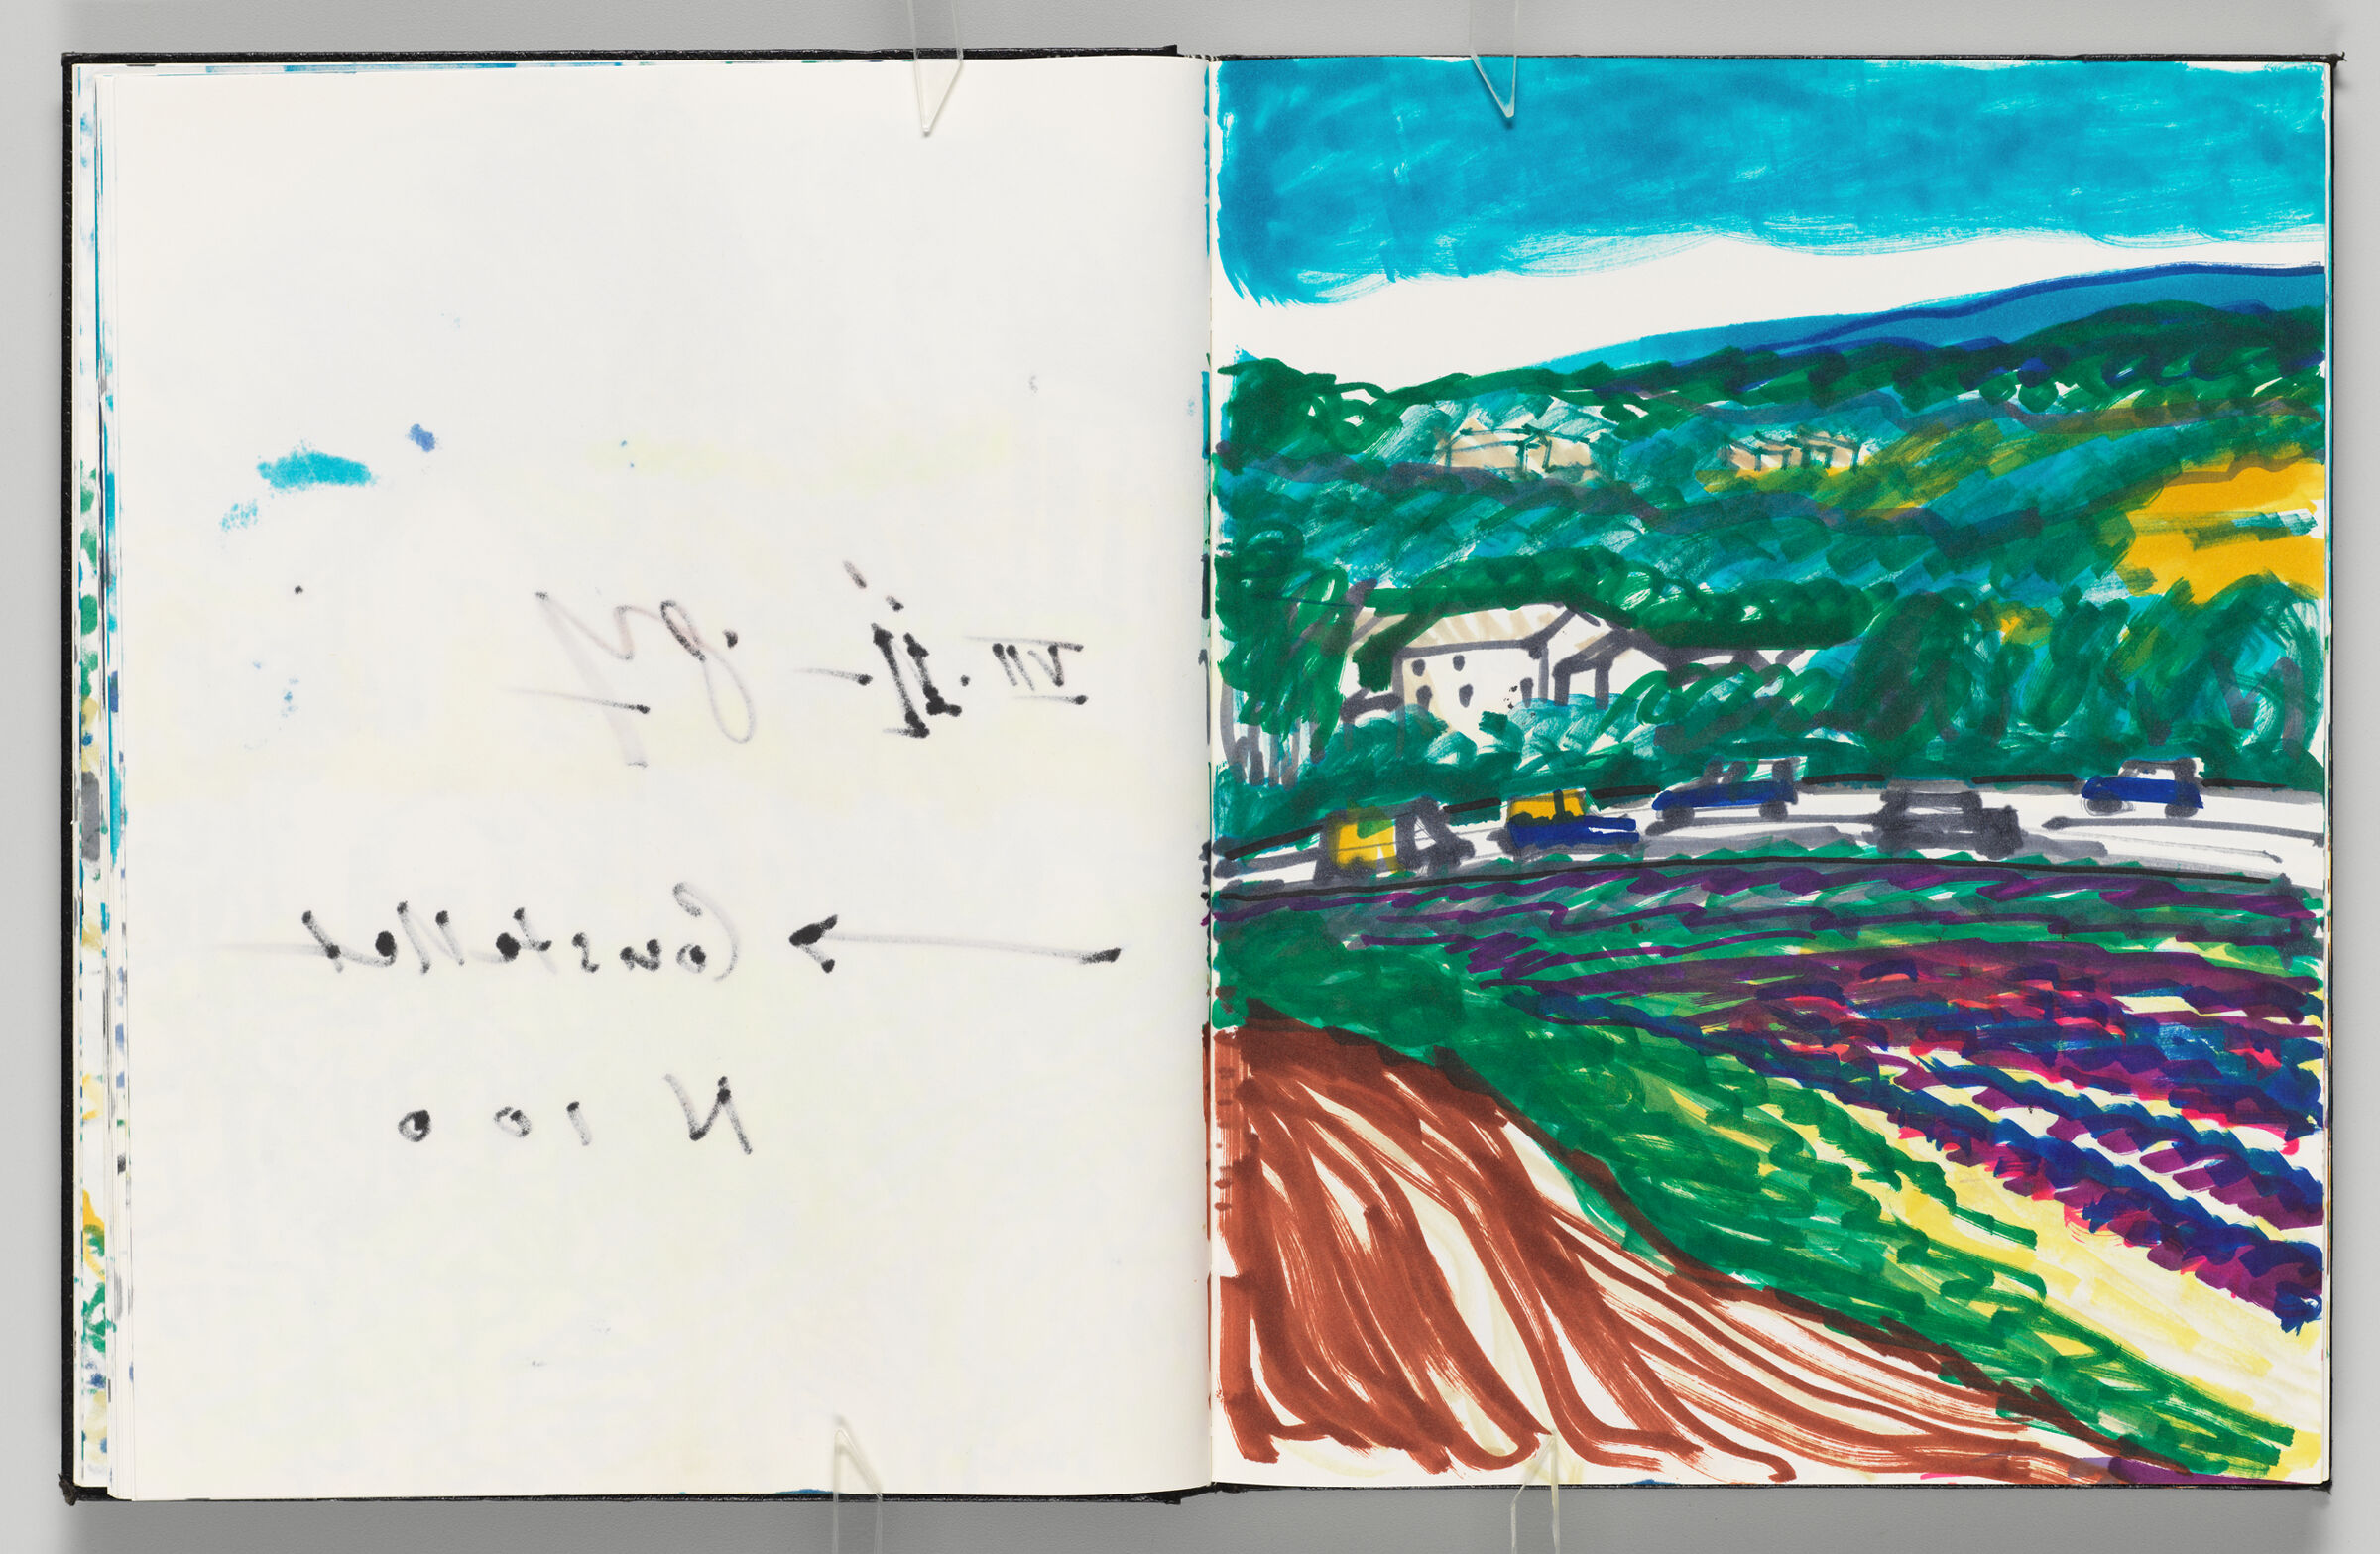 Untitled (Bleed-Through Of Previous Page With Color Transfer, Left Page); Untitled (View En Route To Coustellet, Right Page)